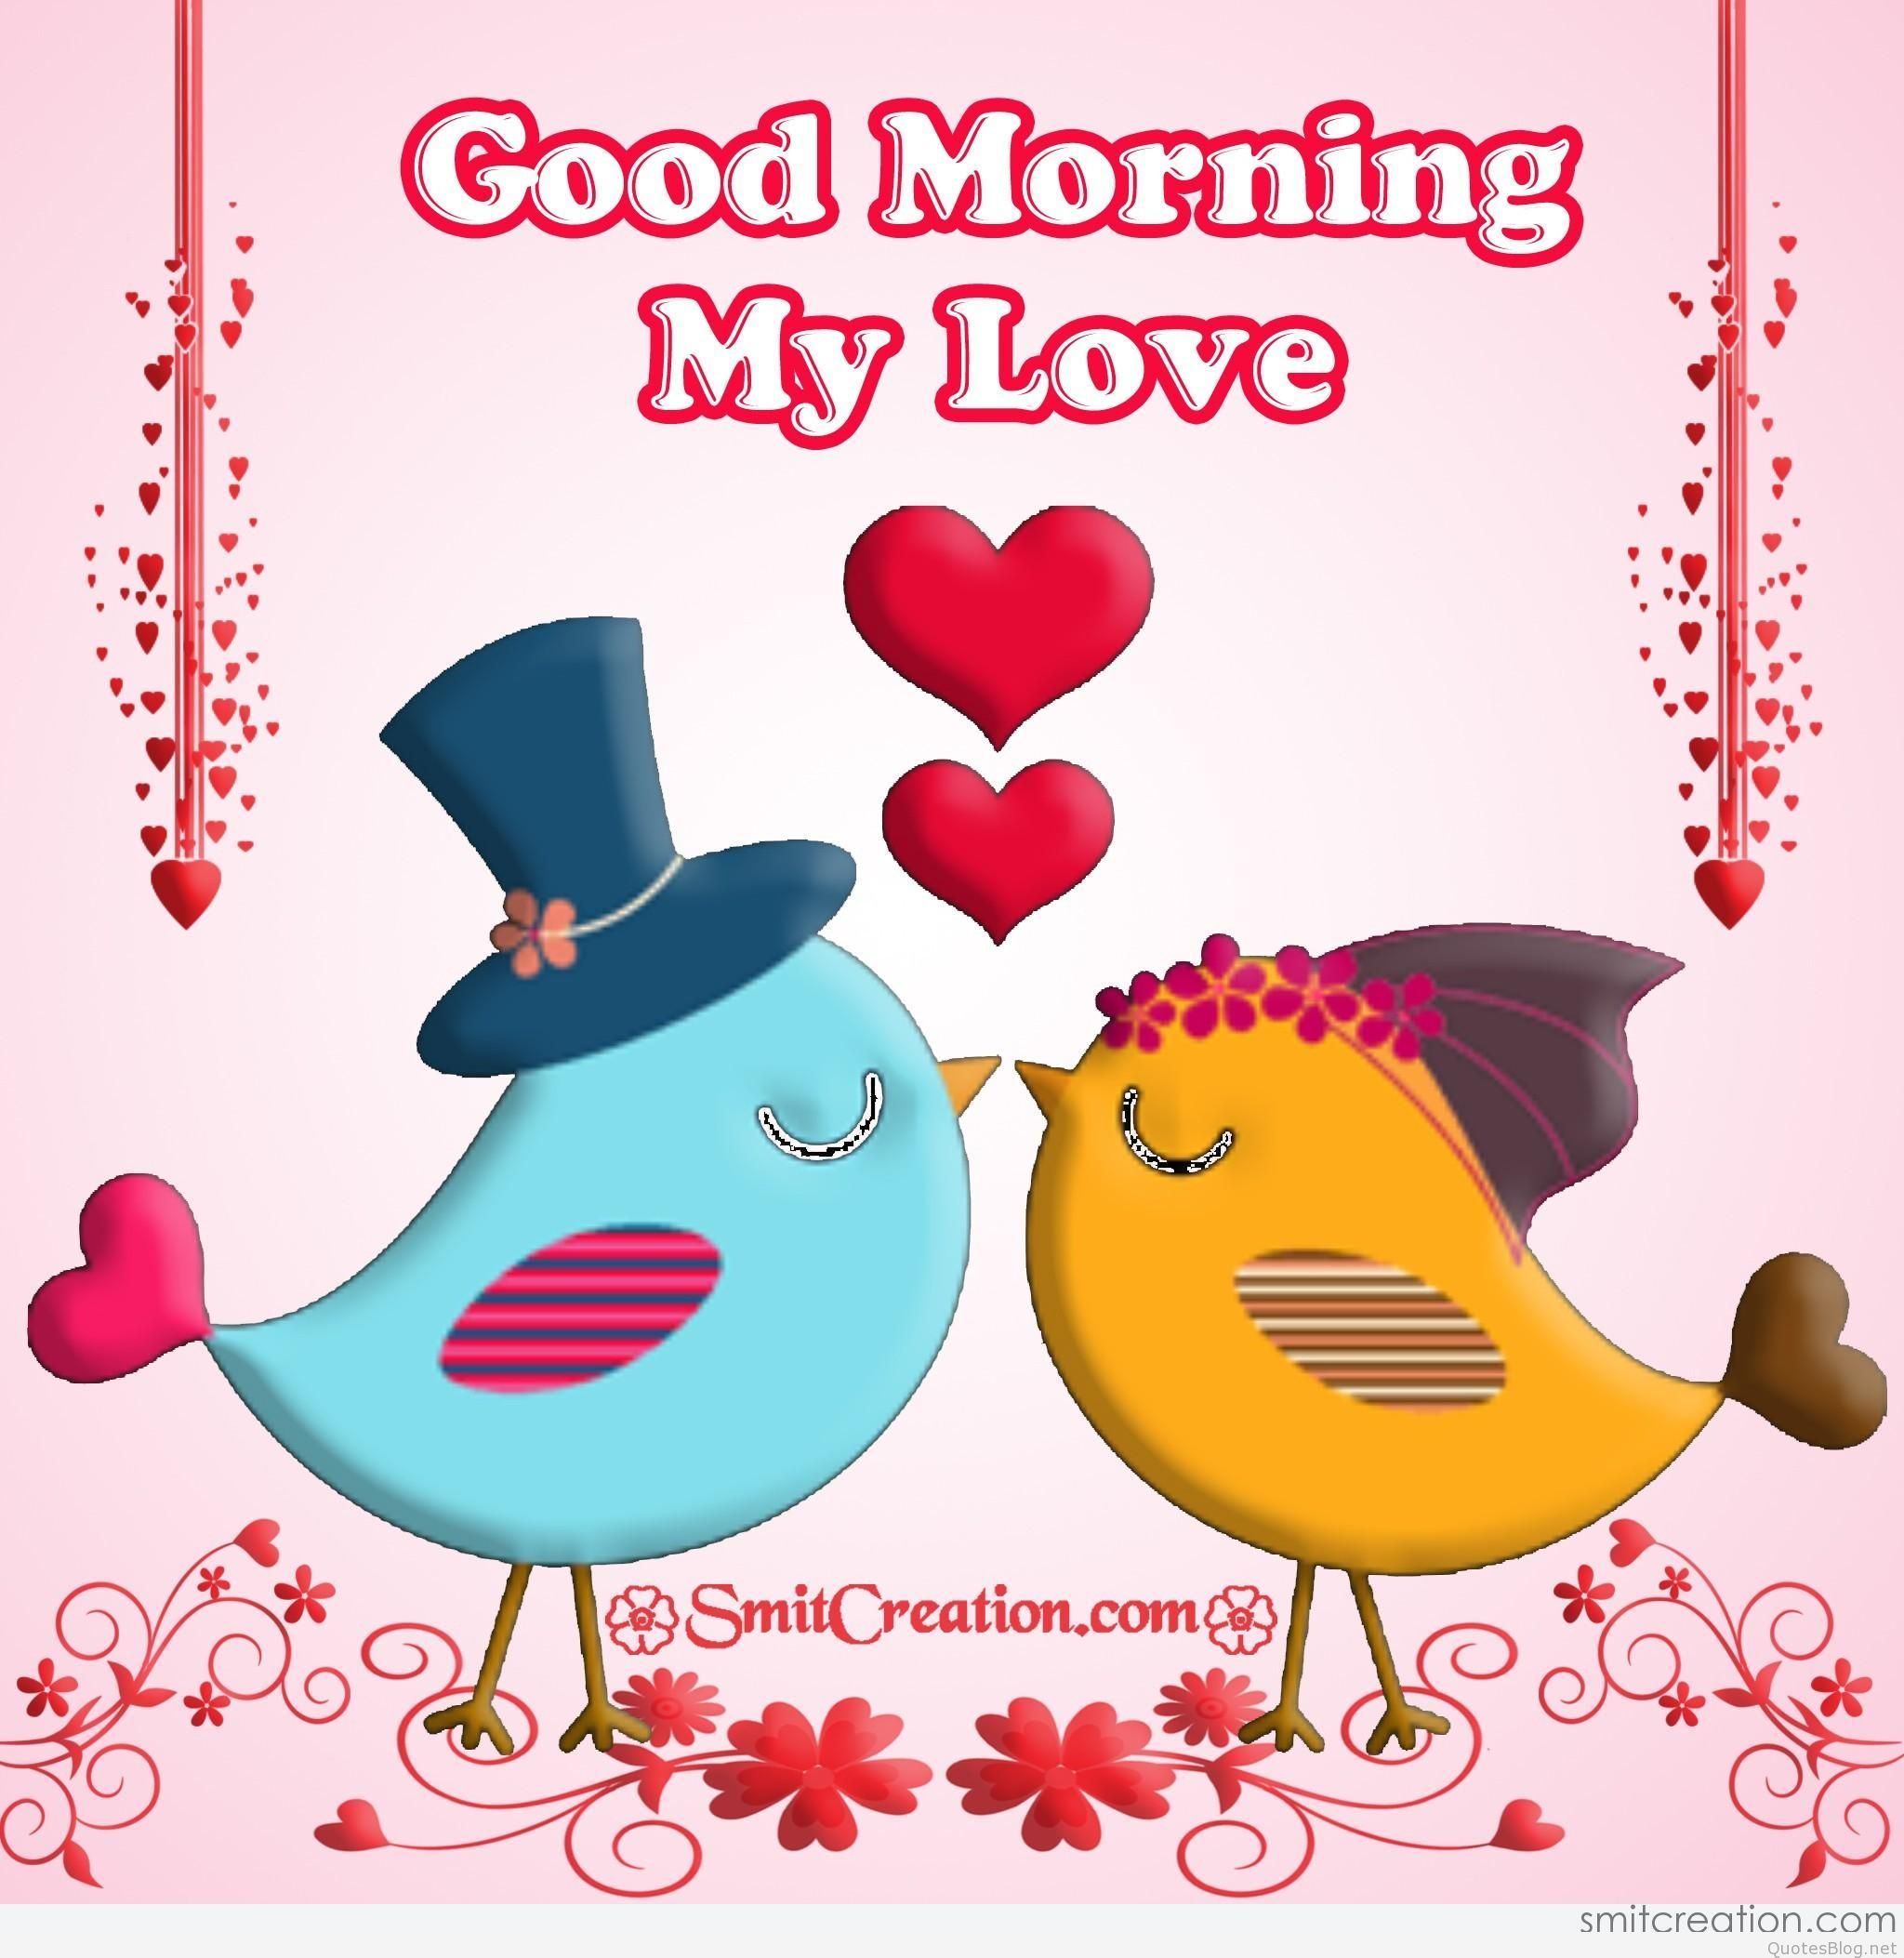 Good Morning My Love Image, DP Status, Messages and Wallpaper